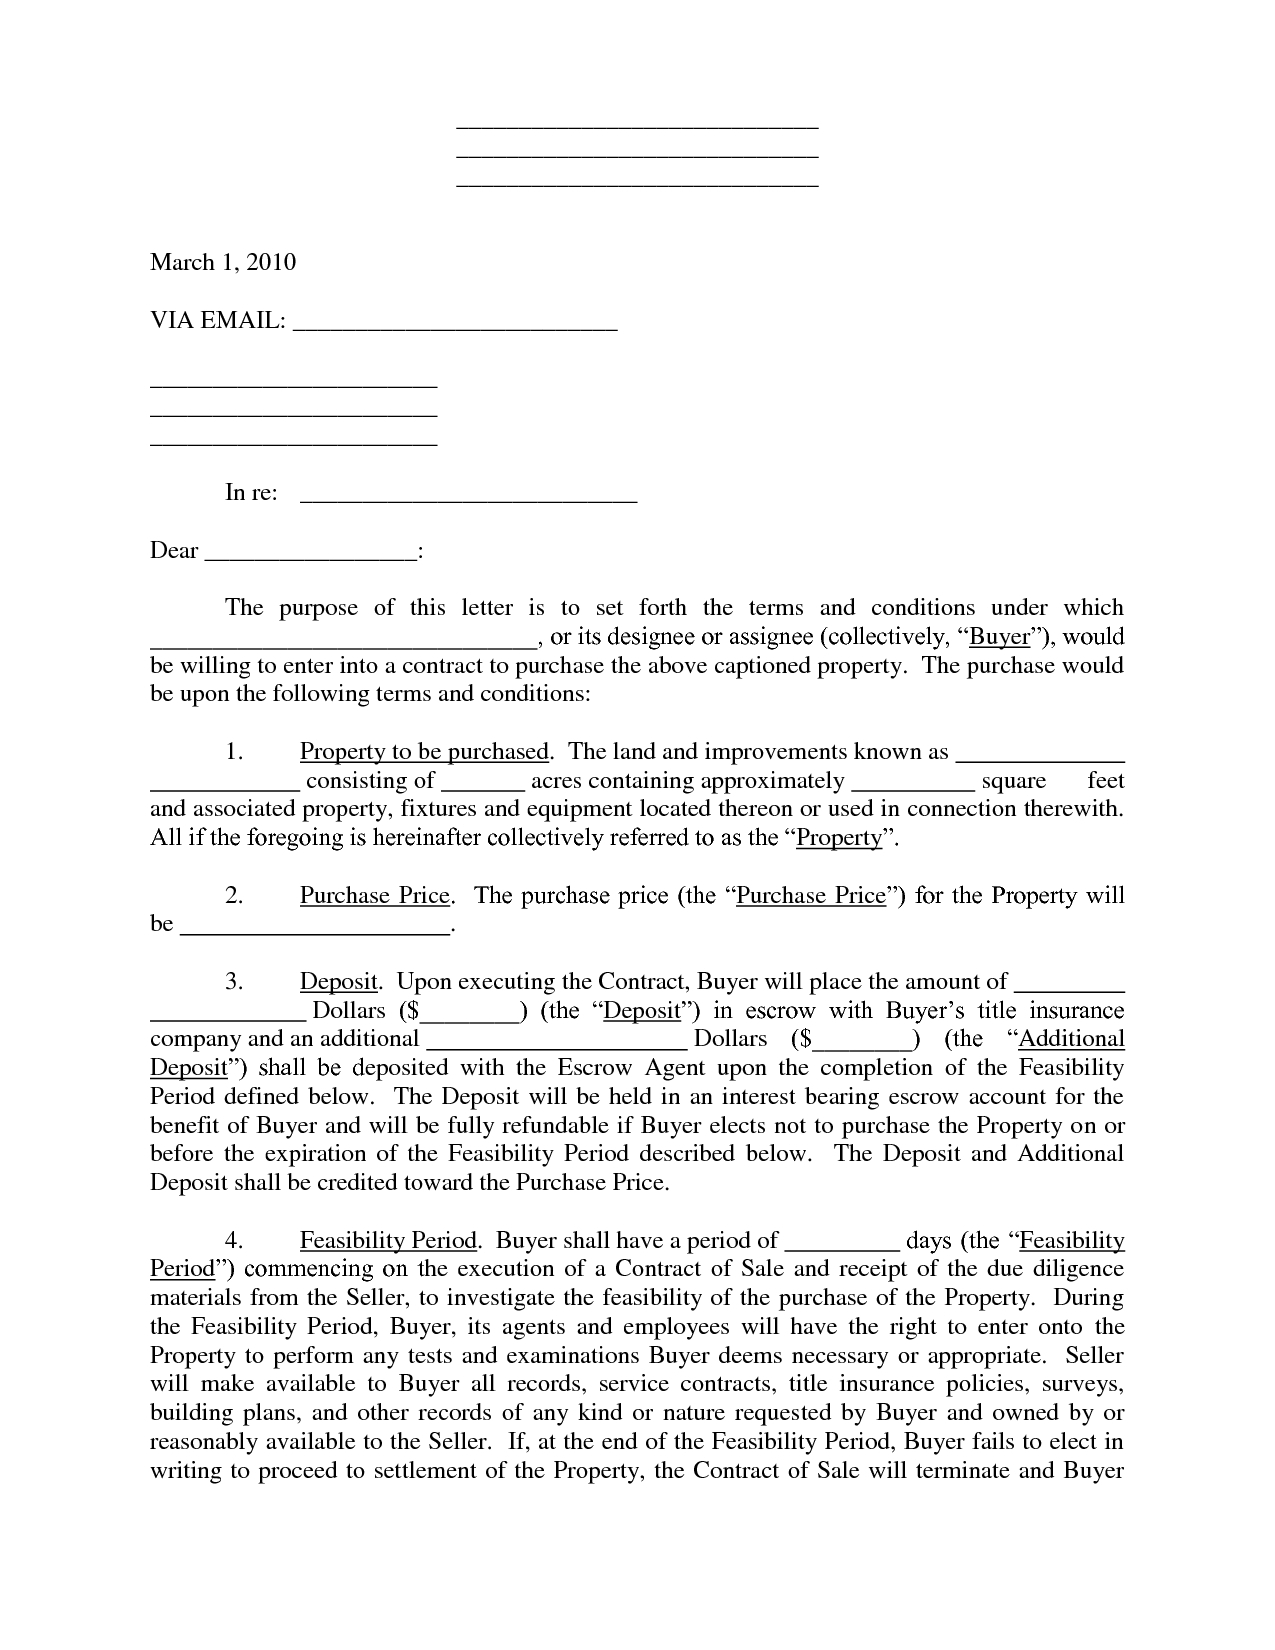 Commercial Lease Letter Of Intent Template - Free Letter Intent torchase Real Estate Template Mercial